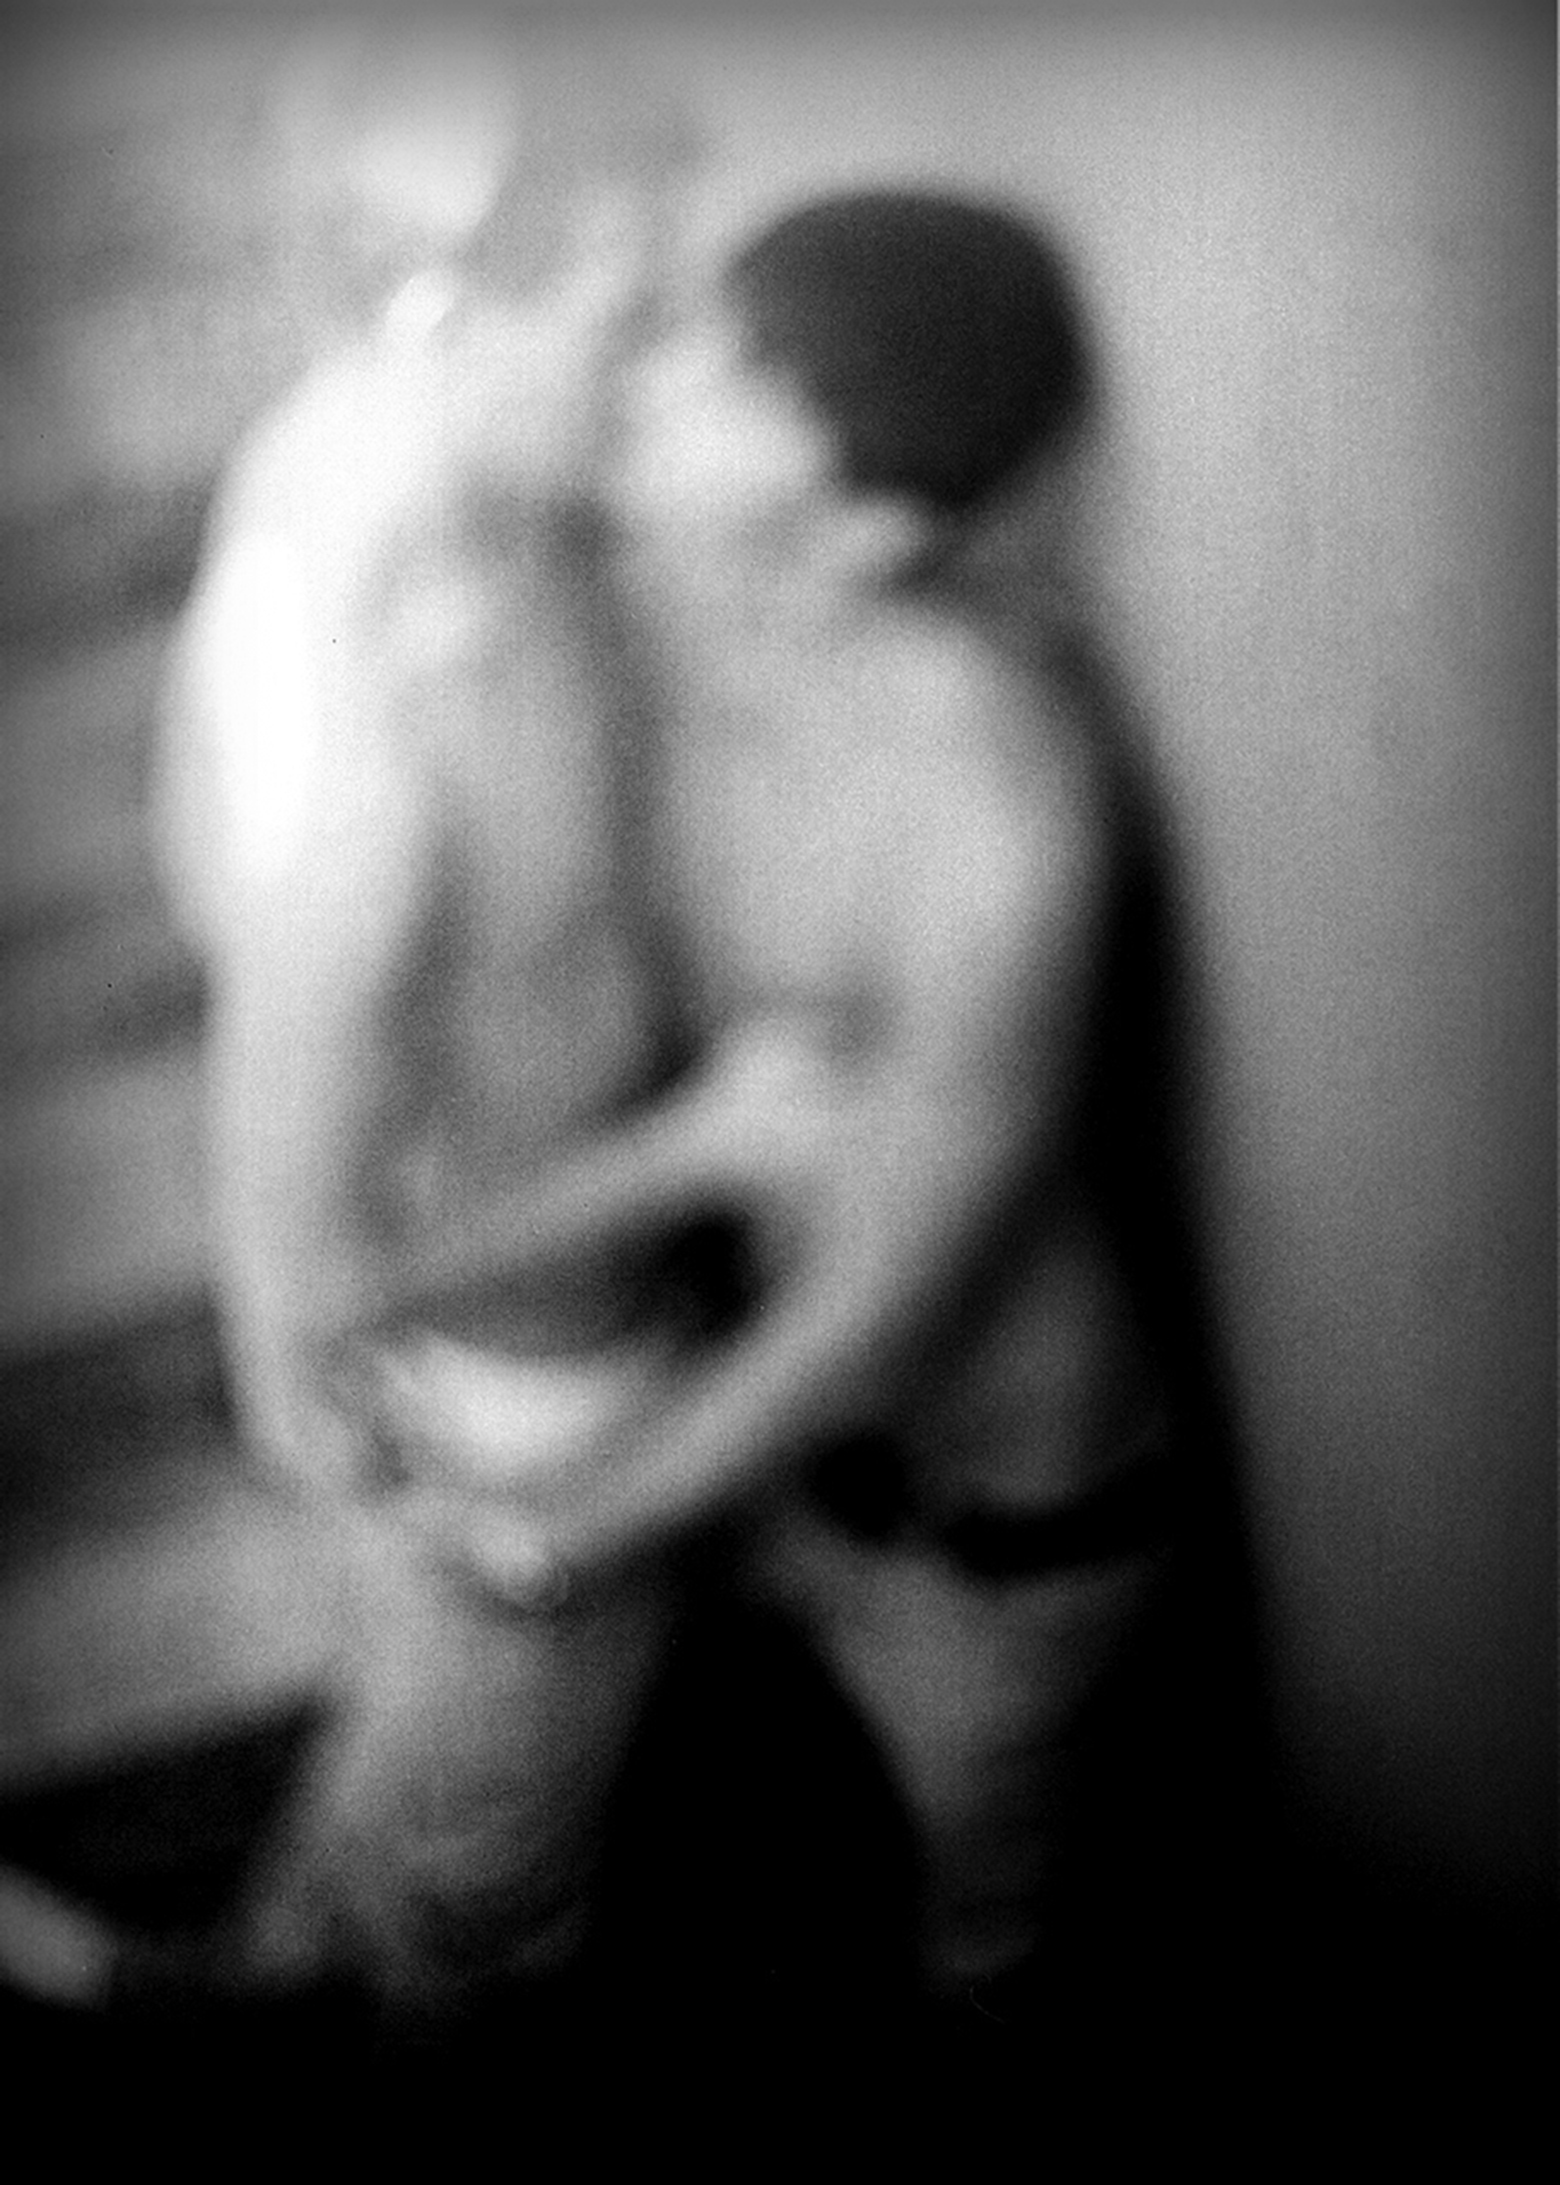 Blurry photo of two shirtless men standing in a stairway and kissing.